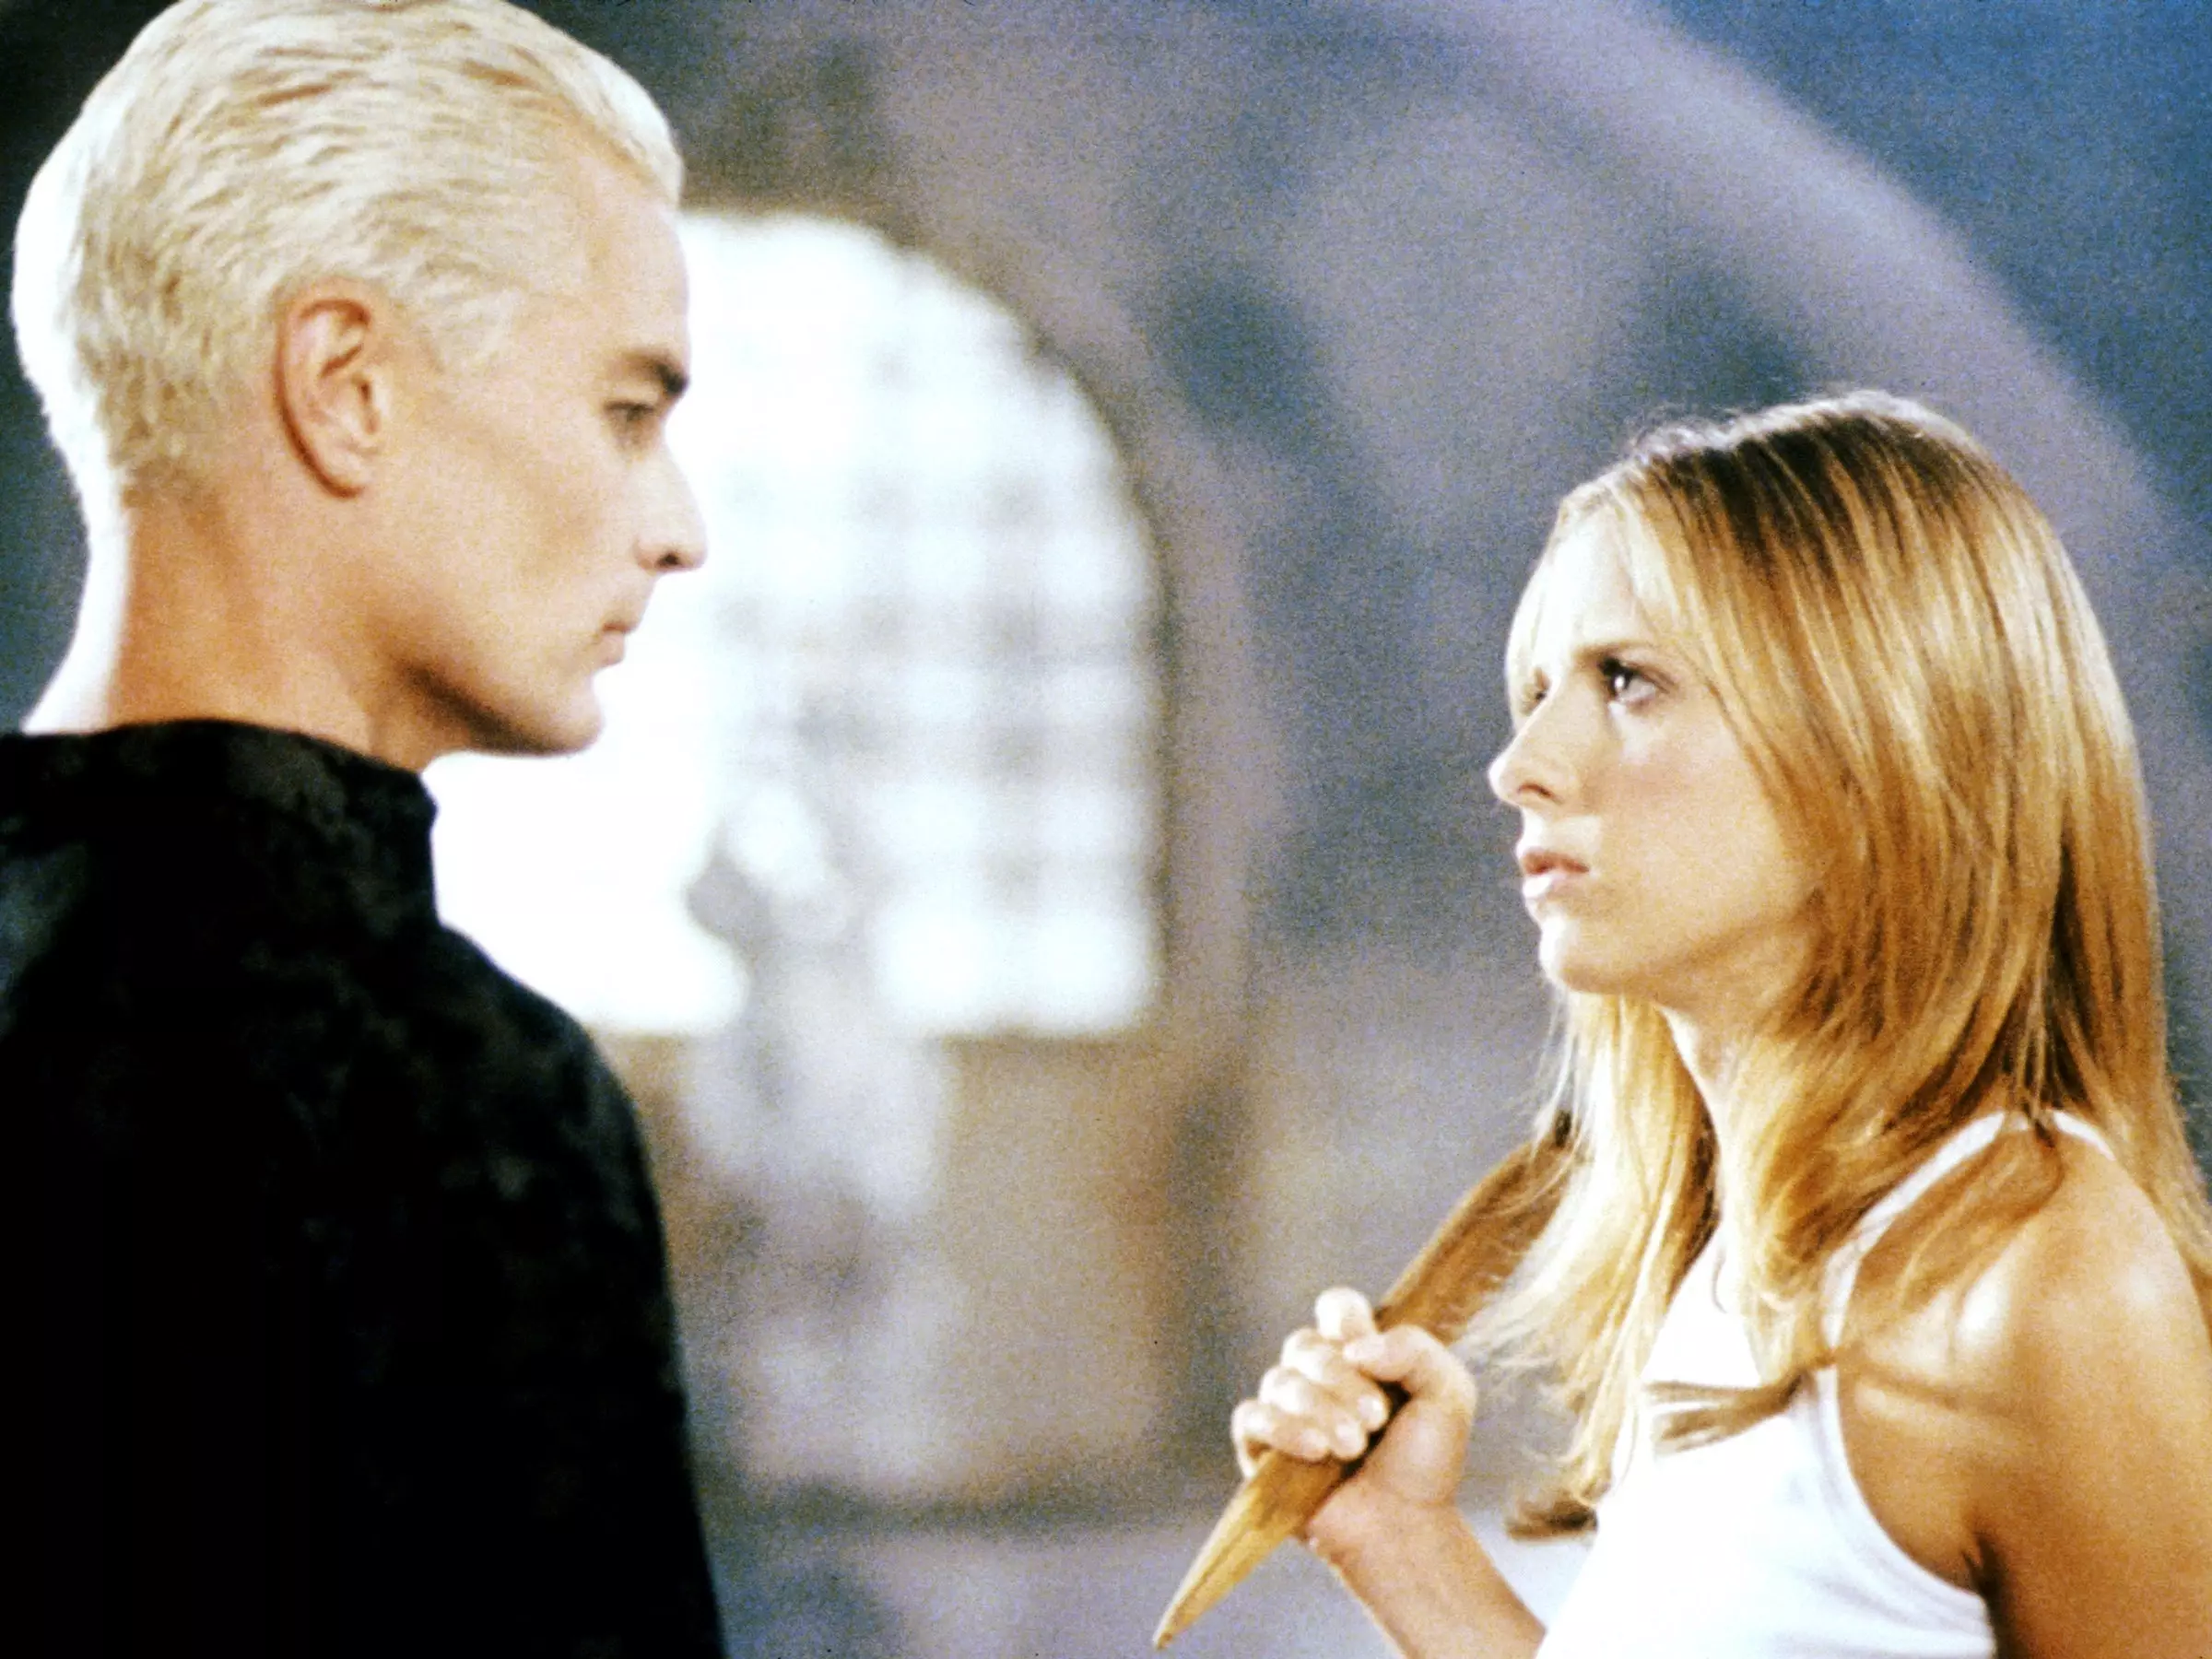 Spike v Angel has been a heated debate ever since the show ended (